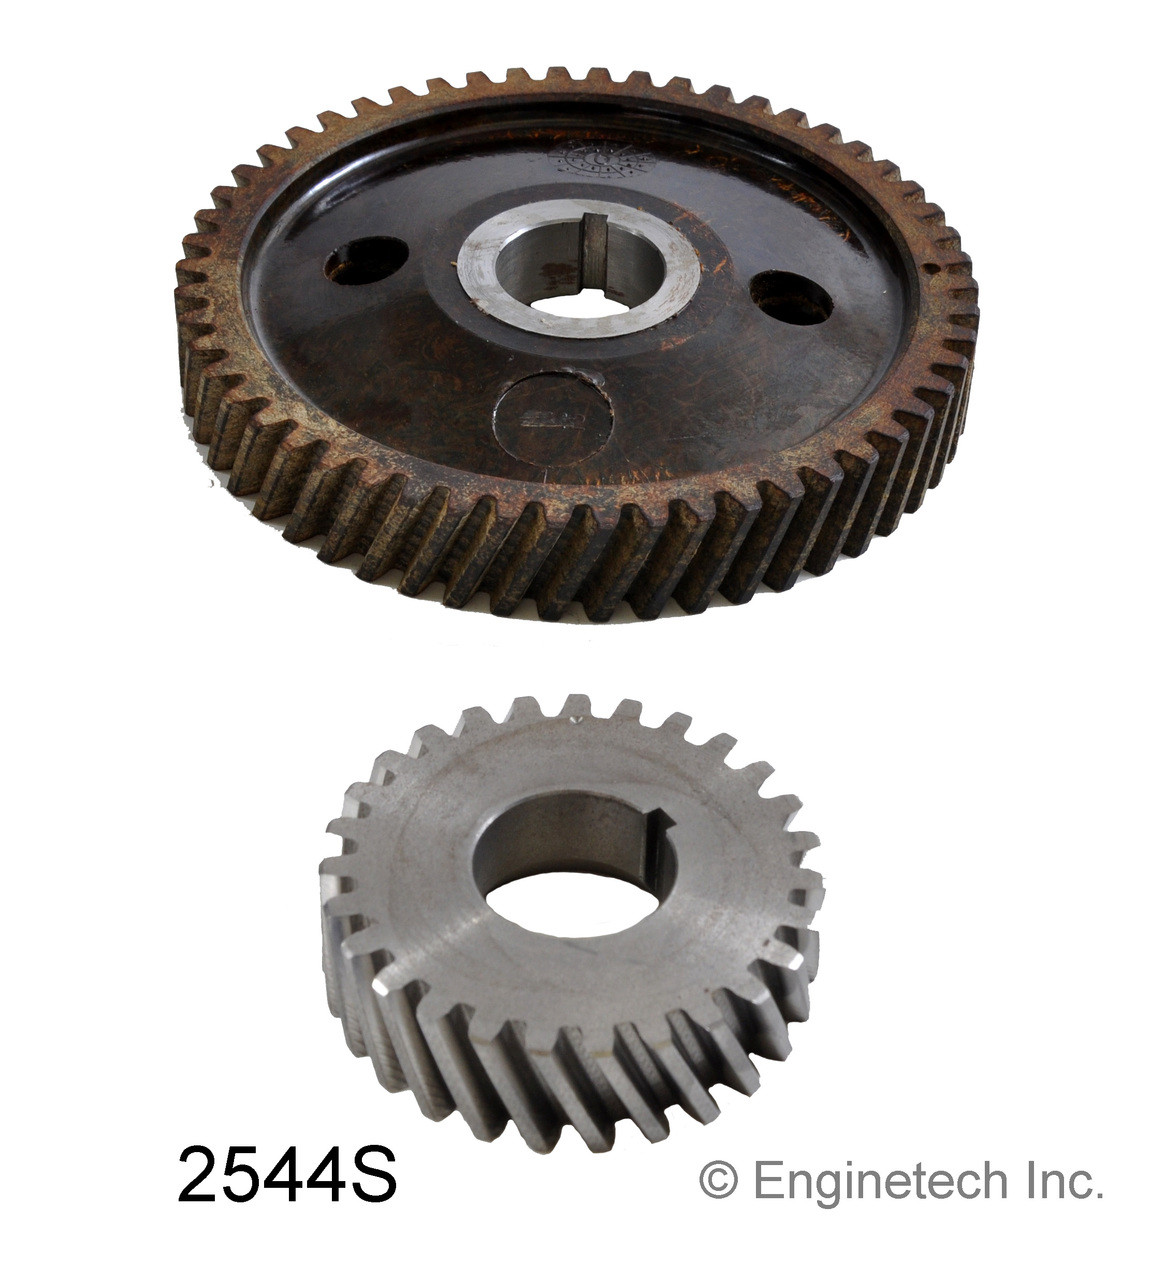 Timing Set - 1986 Buick Century 2.5L (2544S.A6)